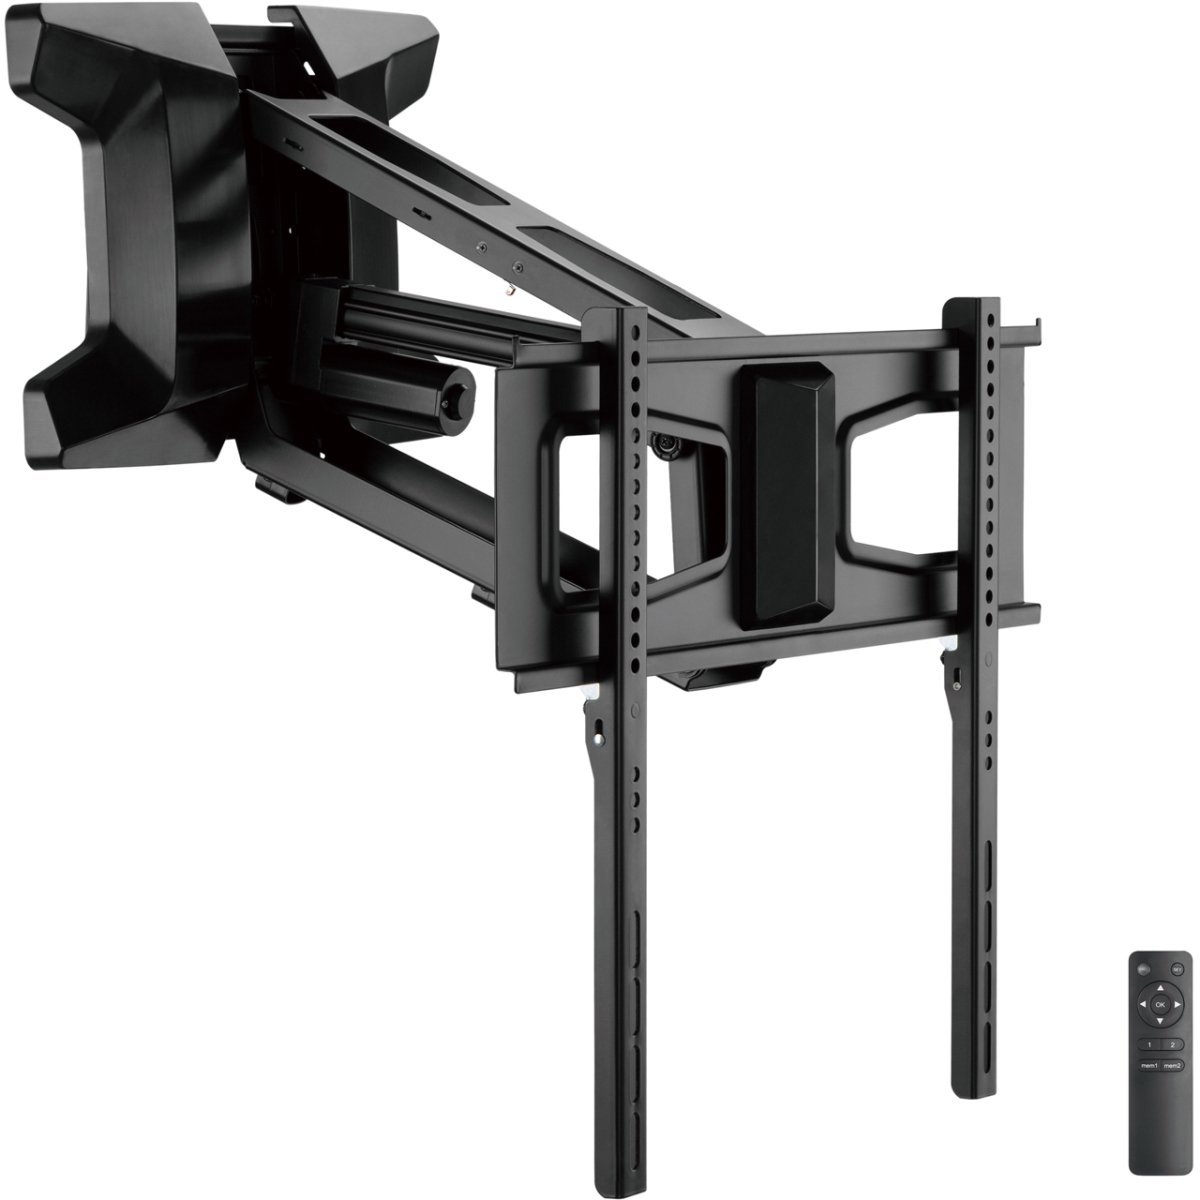 Picture of Scadlock PROM-PMFM6401 Promounts PMFM6401 Motorized Mantel TV Wall Mount for TVs 37 to 70 in. - Supports Up to 77 lbs